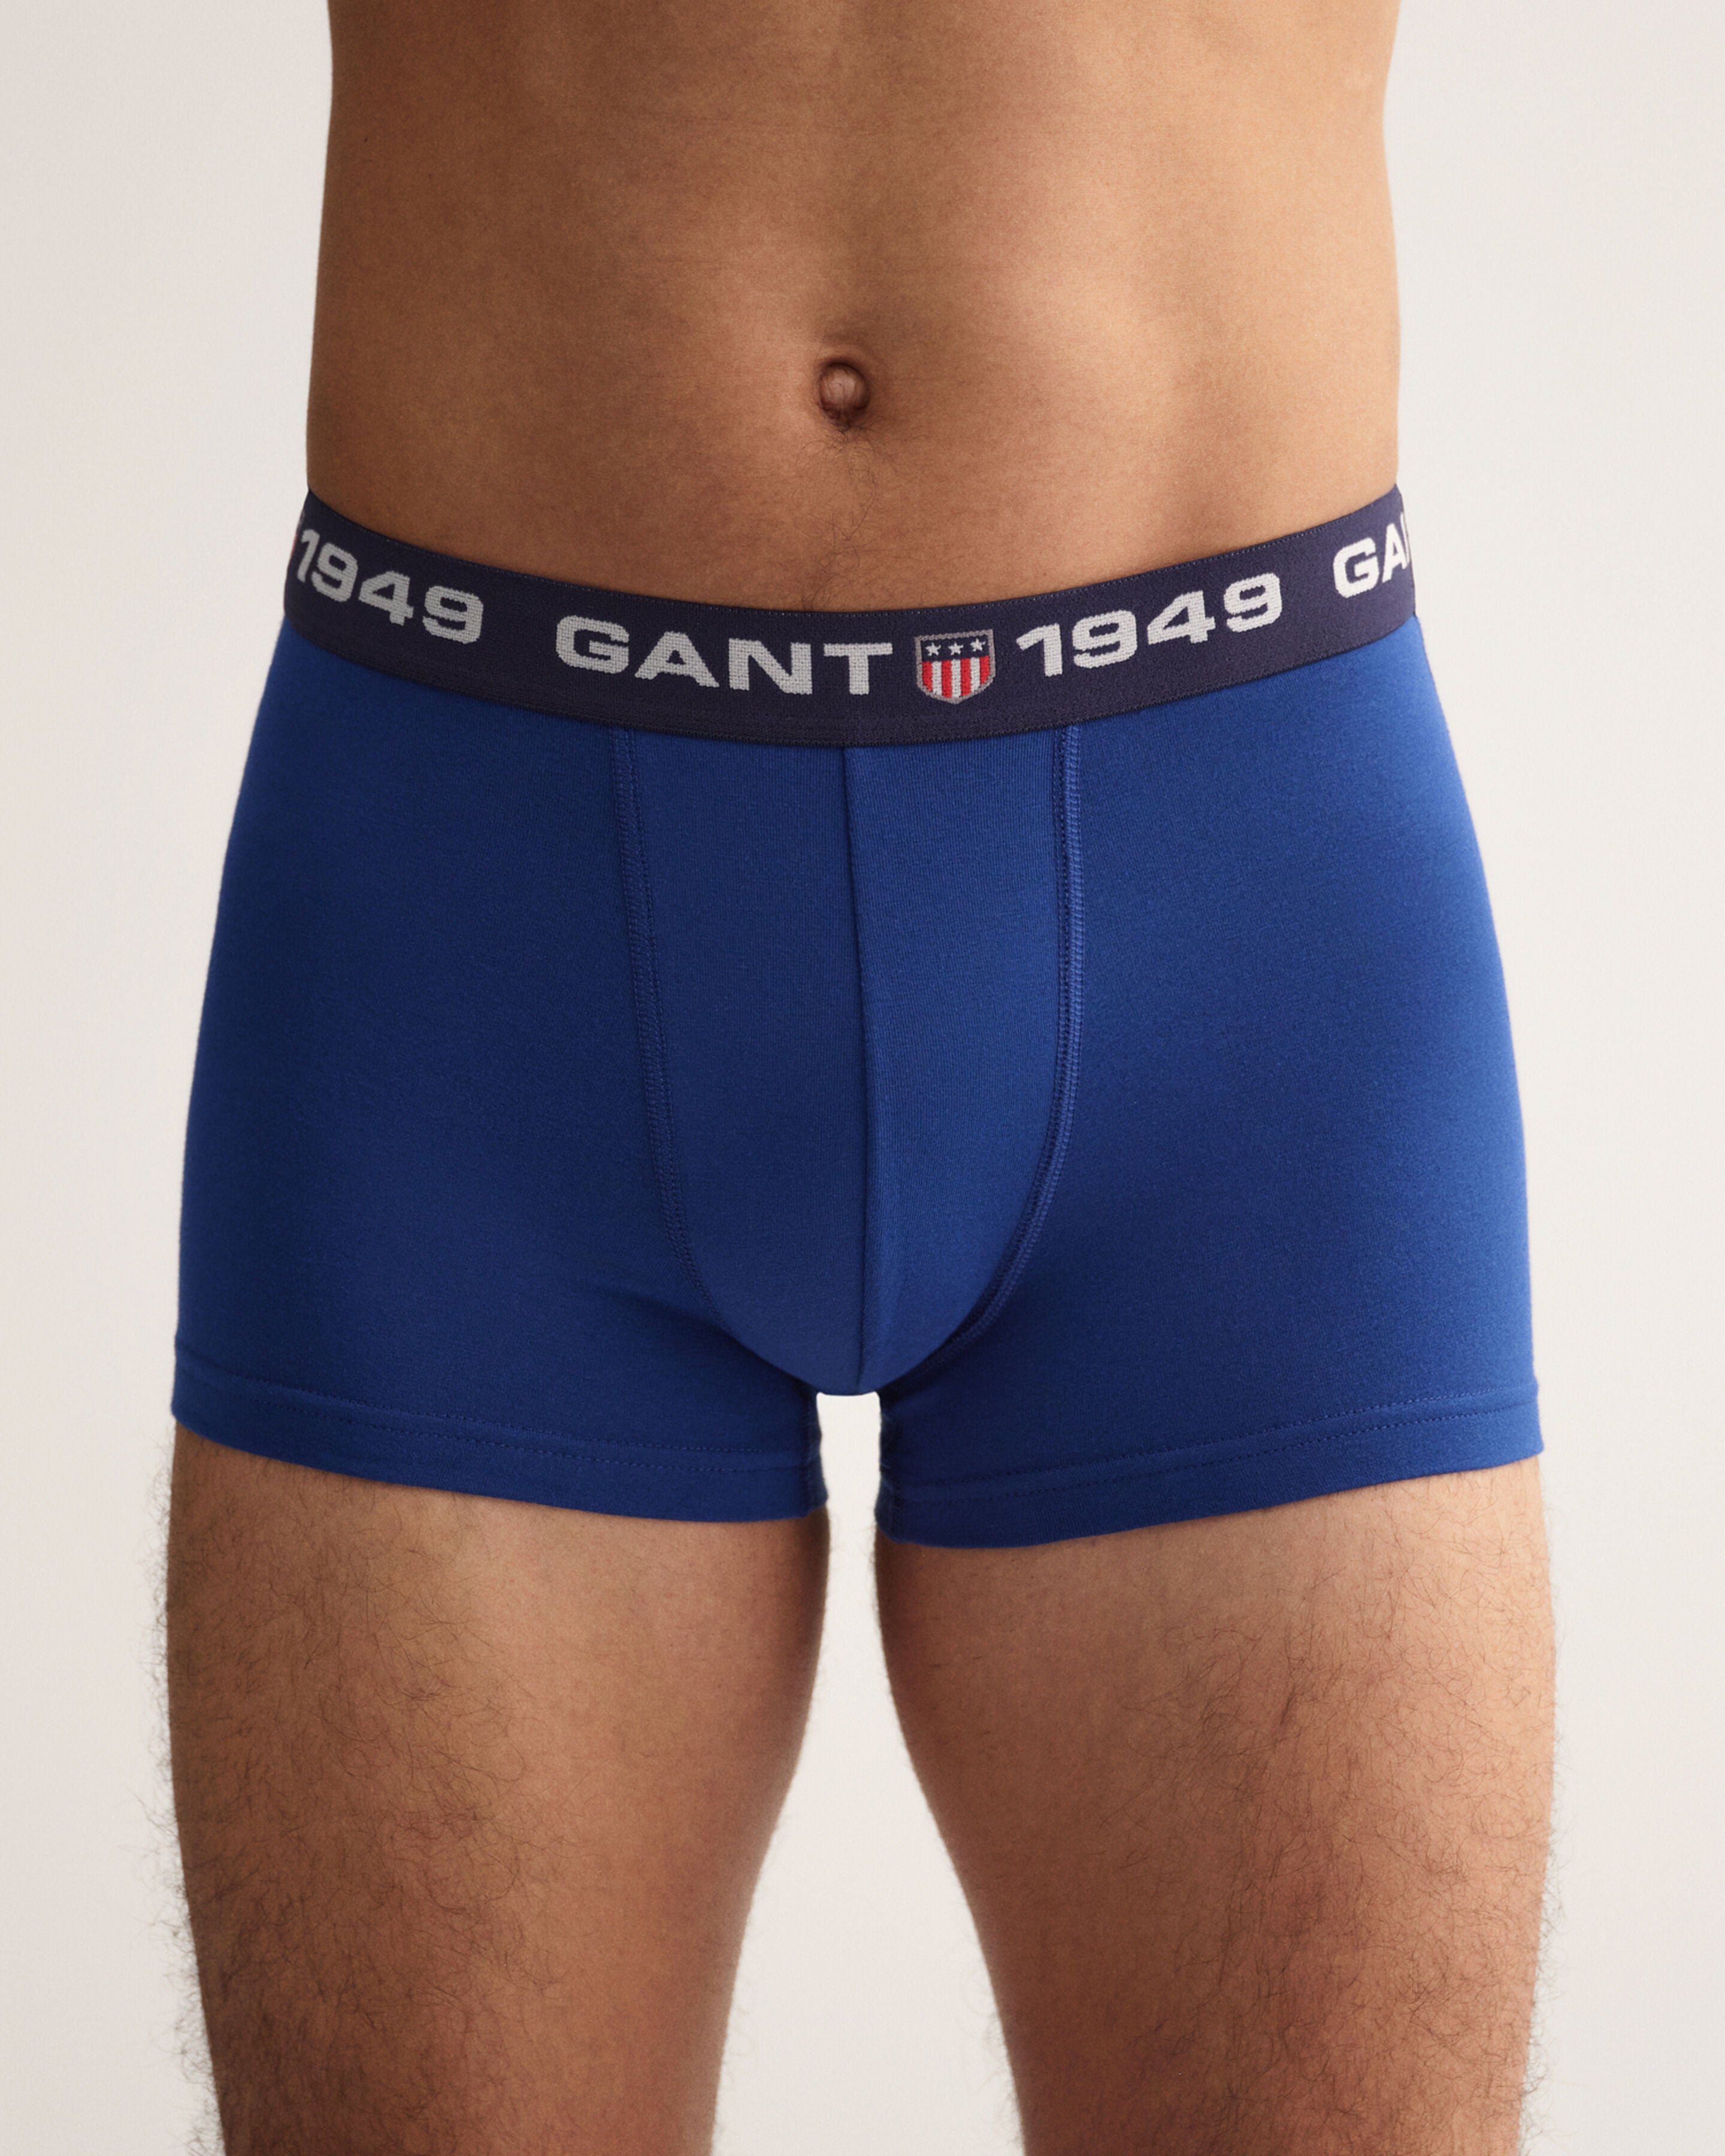 GANT - 3-Pack Retro Shield Trunks in Blue, Red and Navy 902233453 418